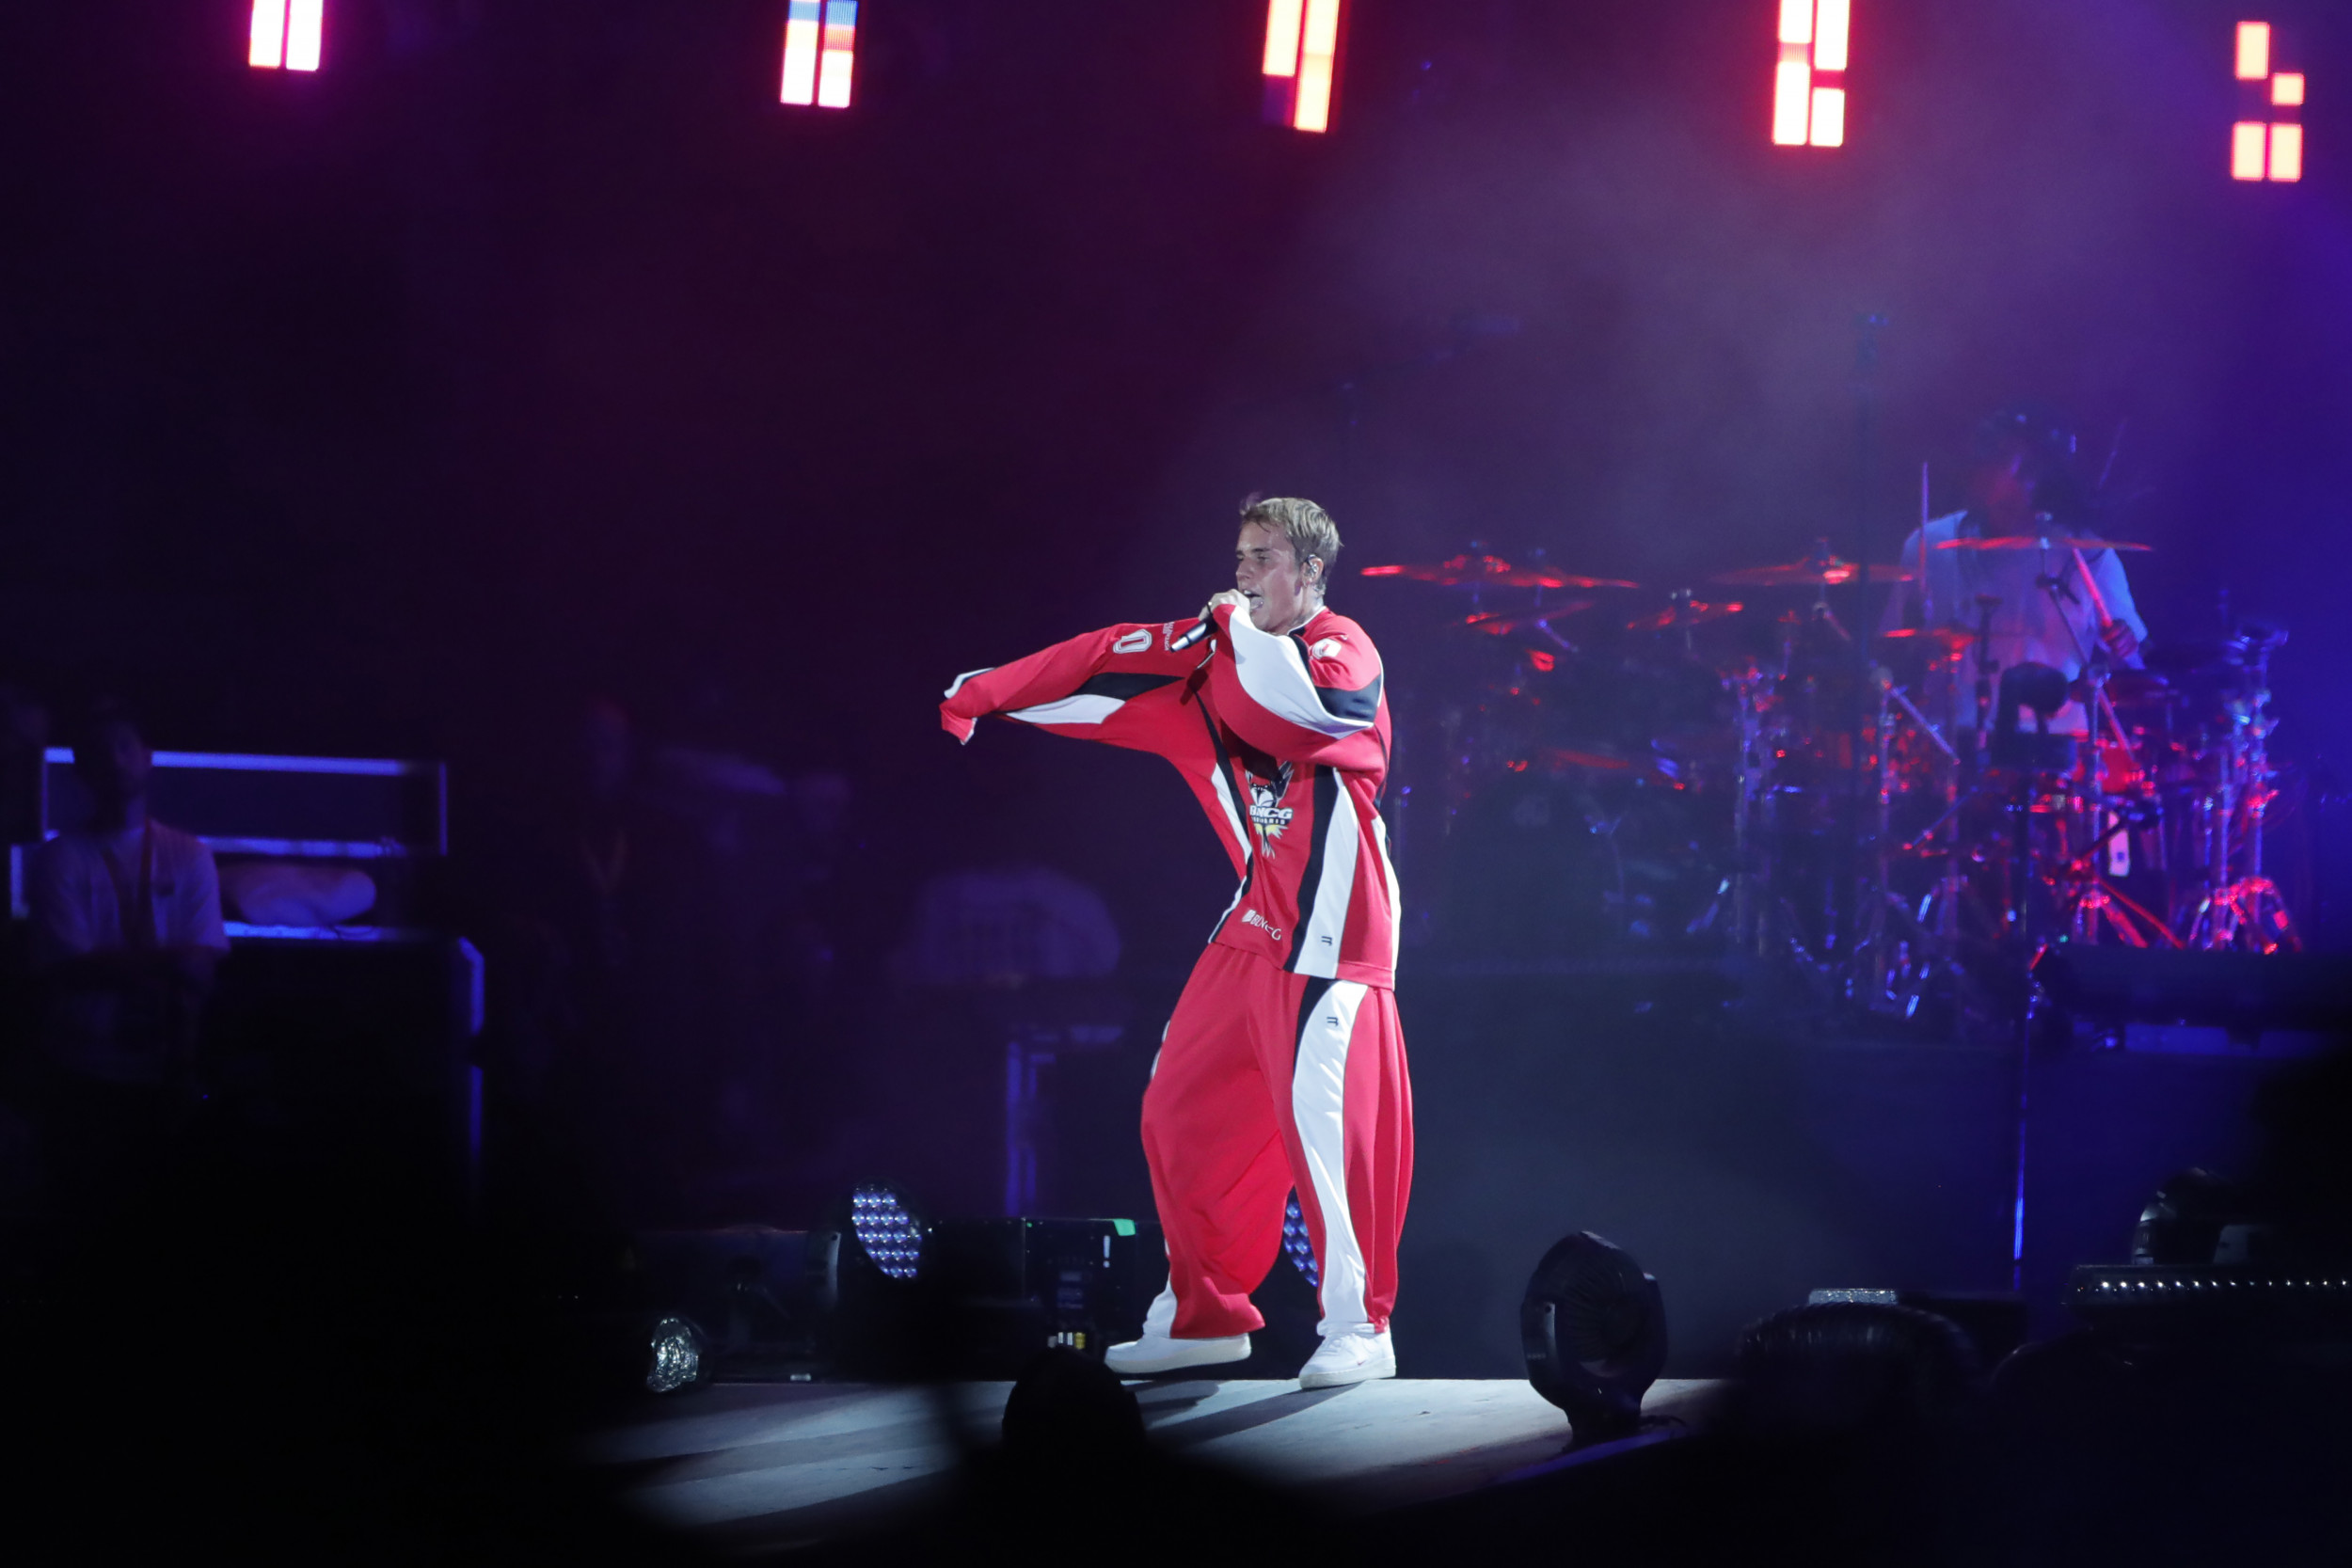 justin-bieber-performs-to-packed-crowd-in-saudi-arabia-despite